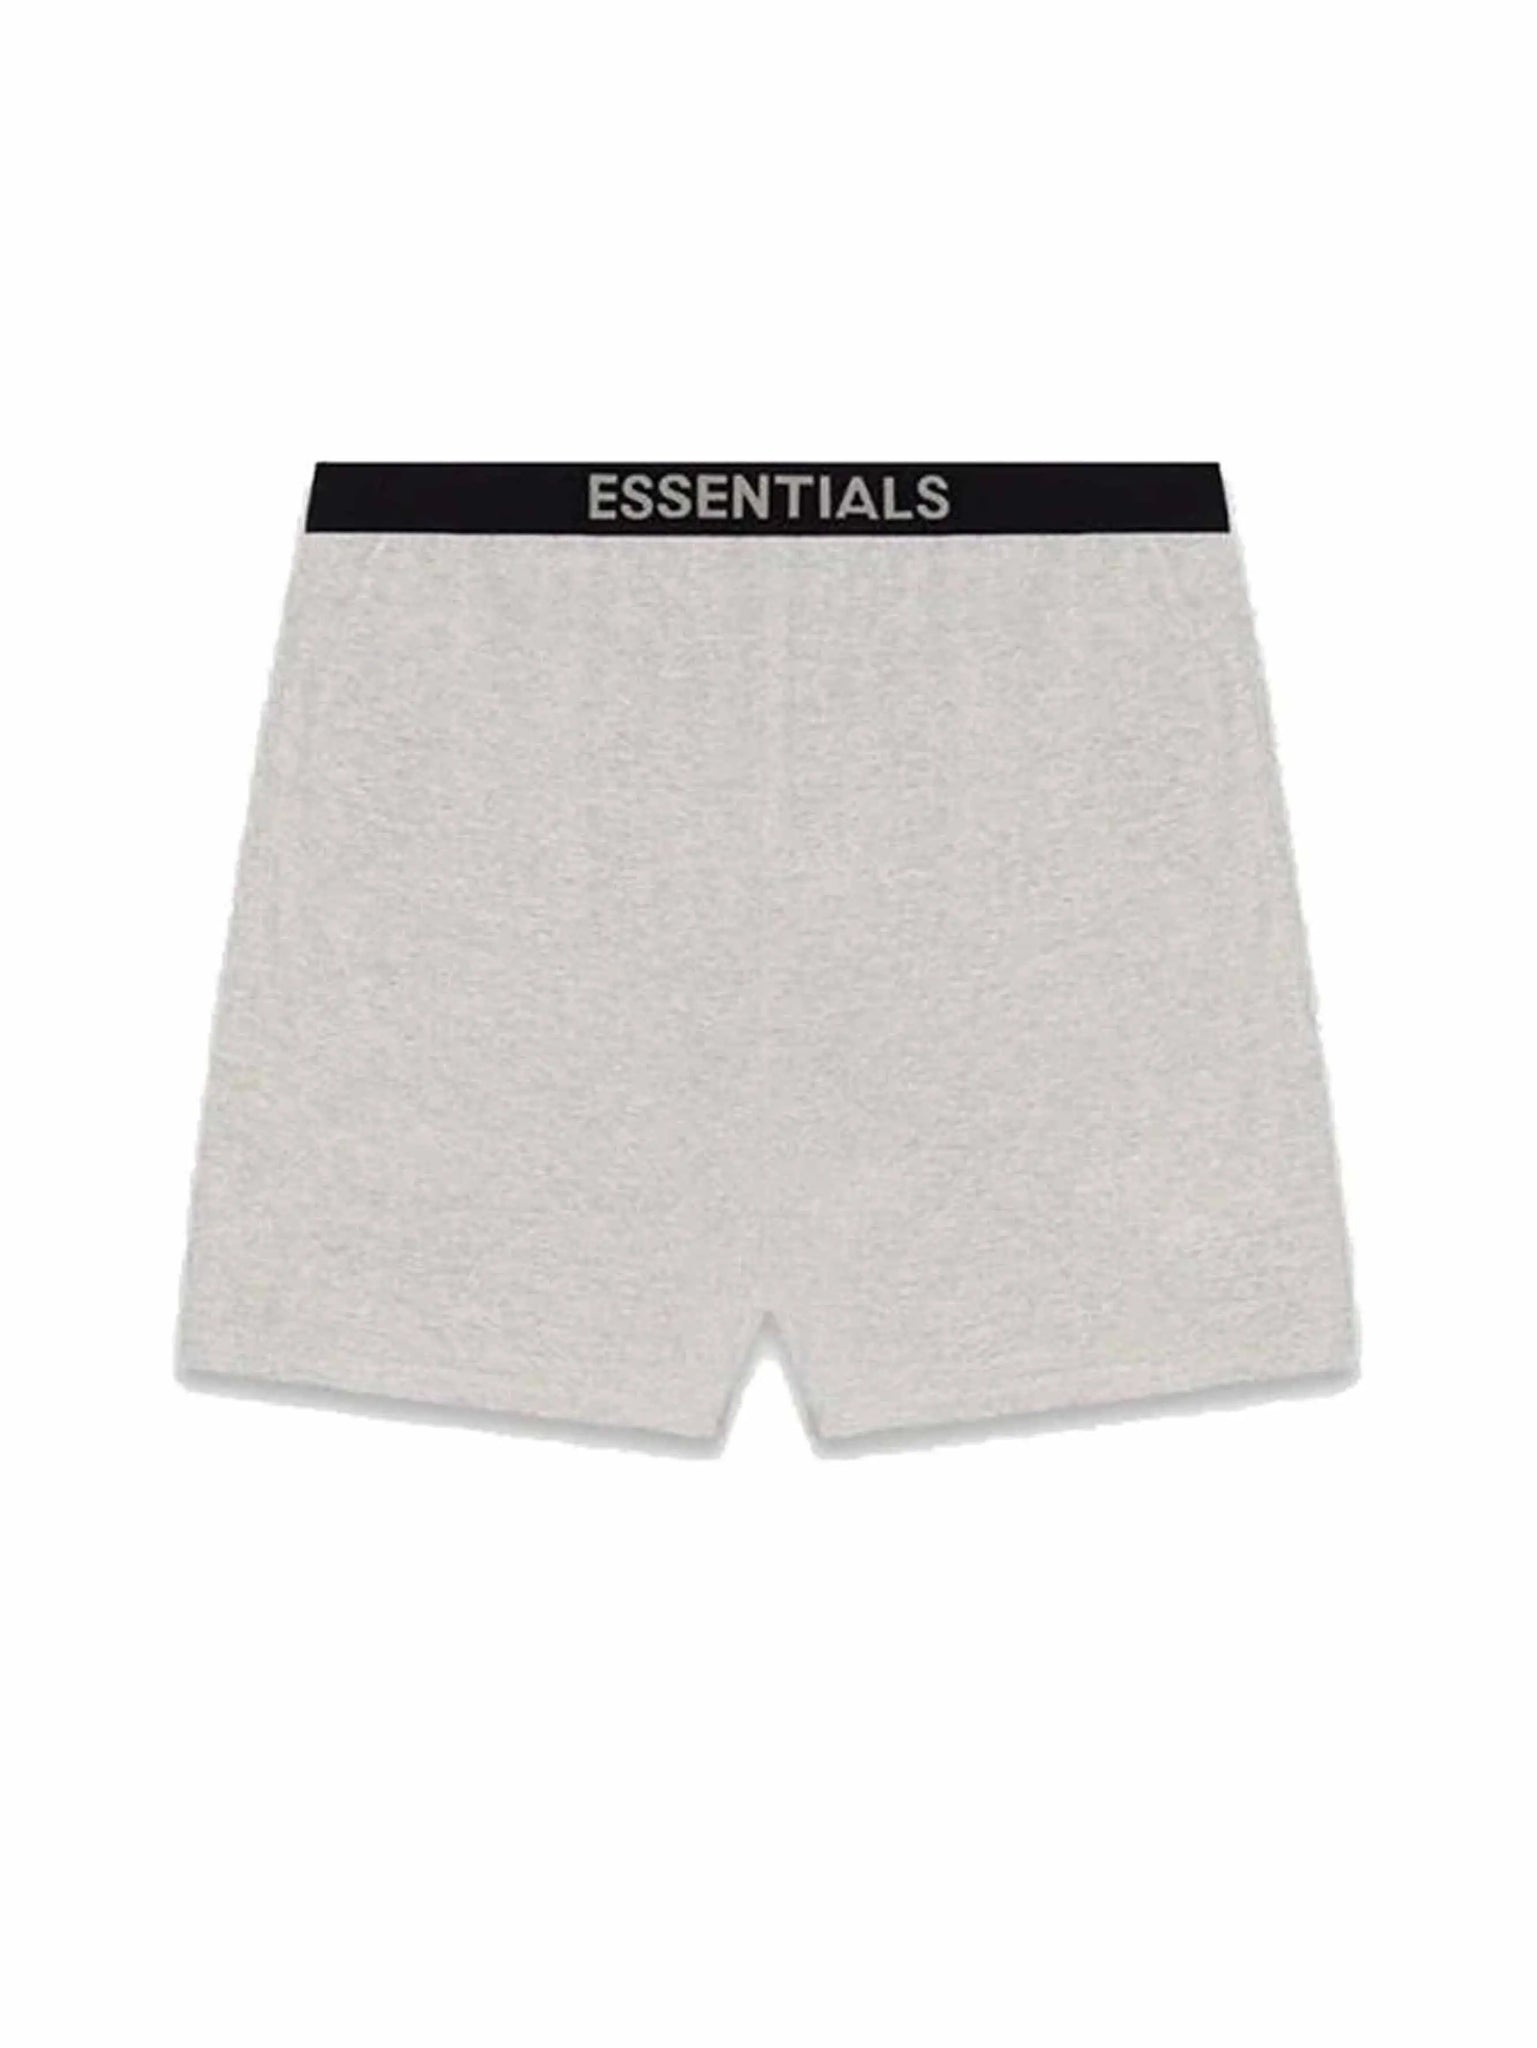 Fear of God Essentials Lounge Shorts Heather Grey in Auckland, New Zealand - Shop name